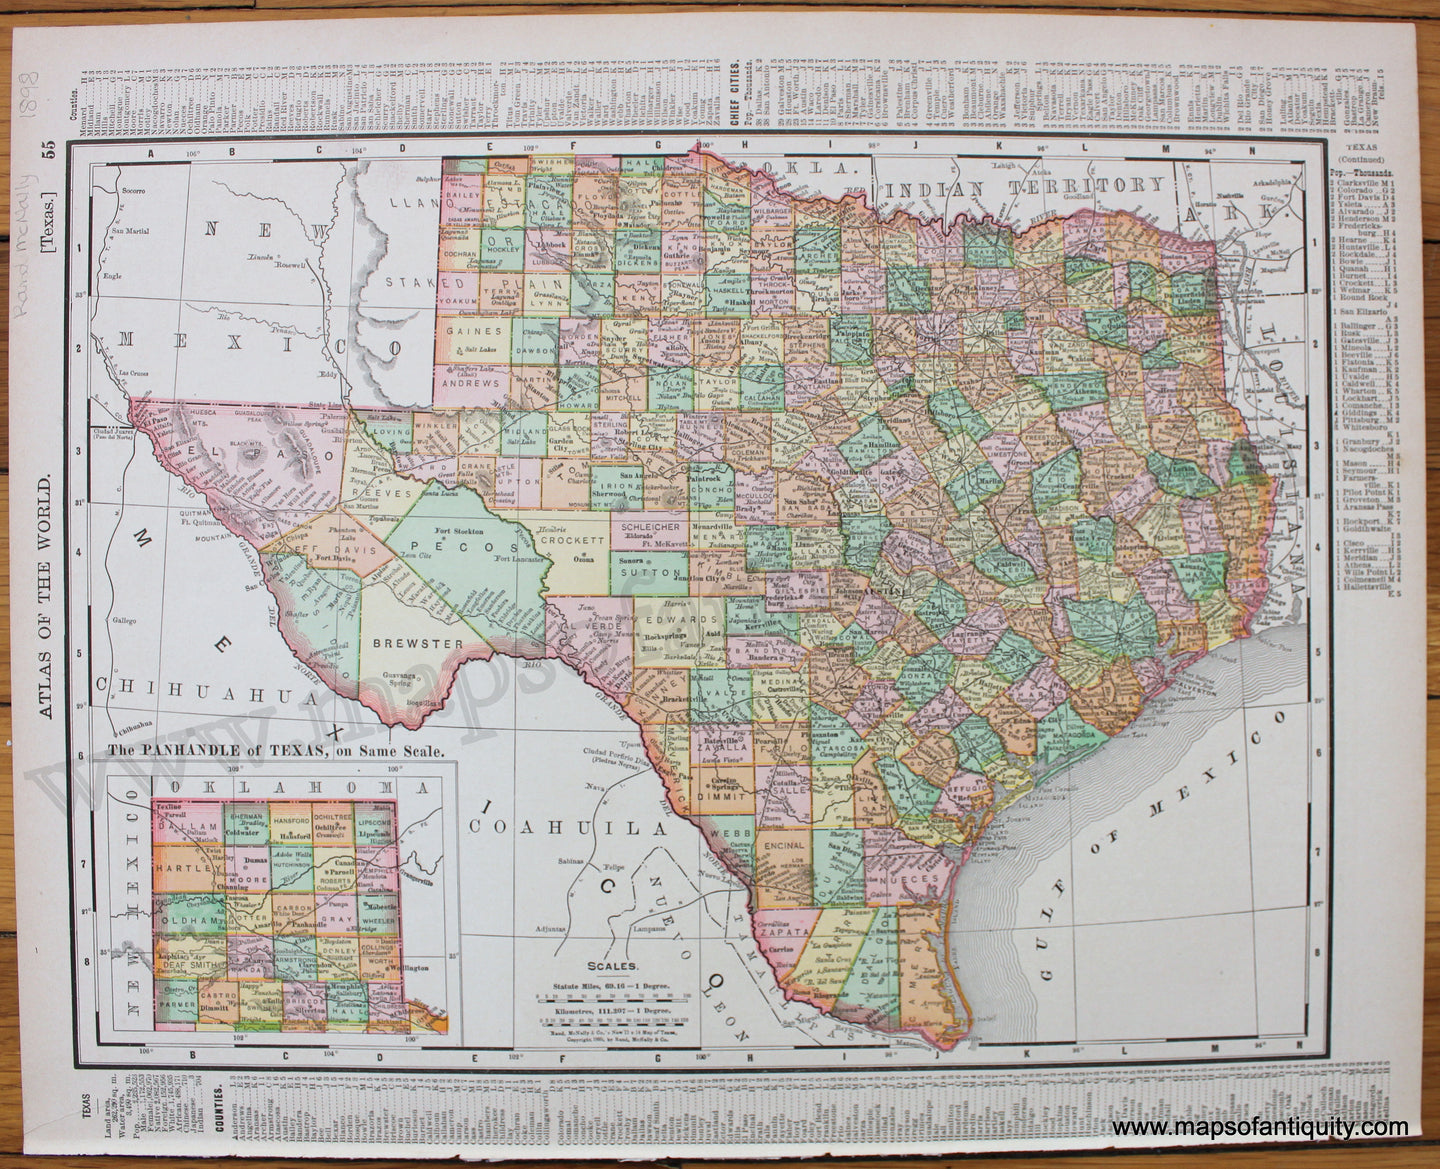 Antique-Printed-Color-Map-Texas;-verso:-Oklahoma-and-Indian-Territory-1898-Rand-McNally-South-Texas-1800s-19th-century-Maps-of-Antiquity